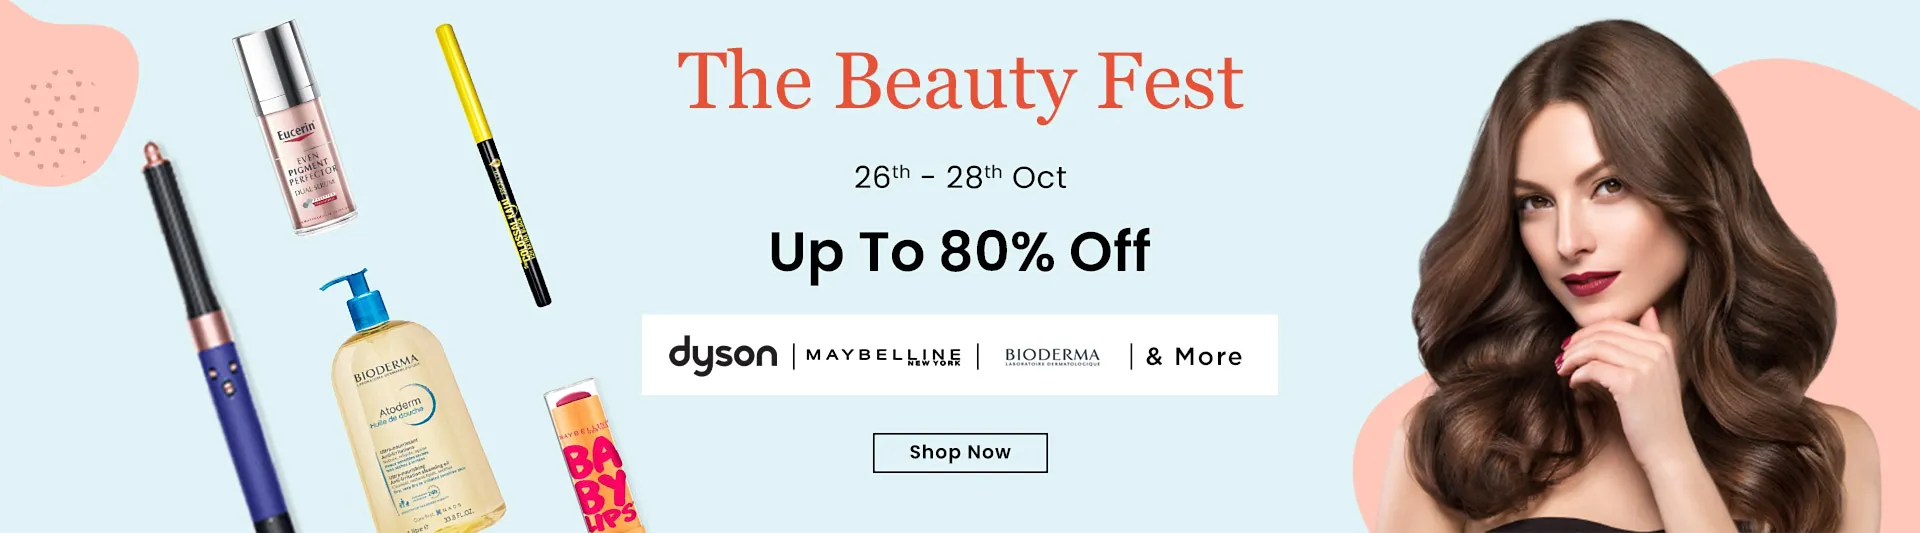 Supermoms_Beauty_Header_All_All_All_All_0_All_NA_NA_old_FH_Beautyfest_CPID-529_